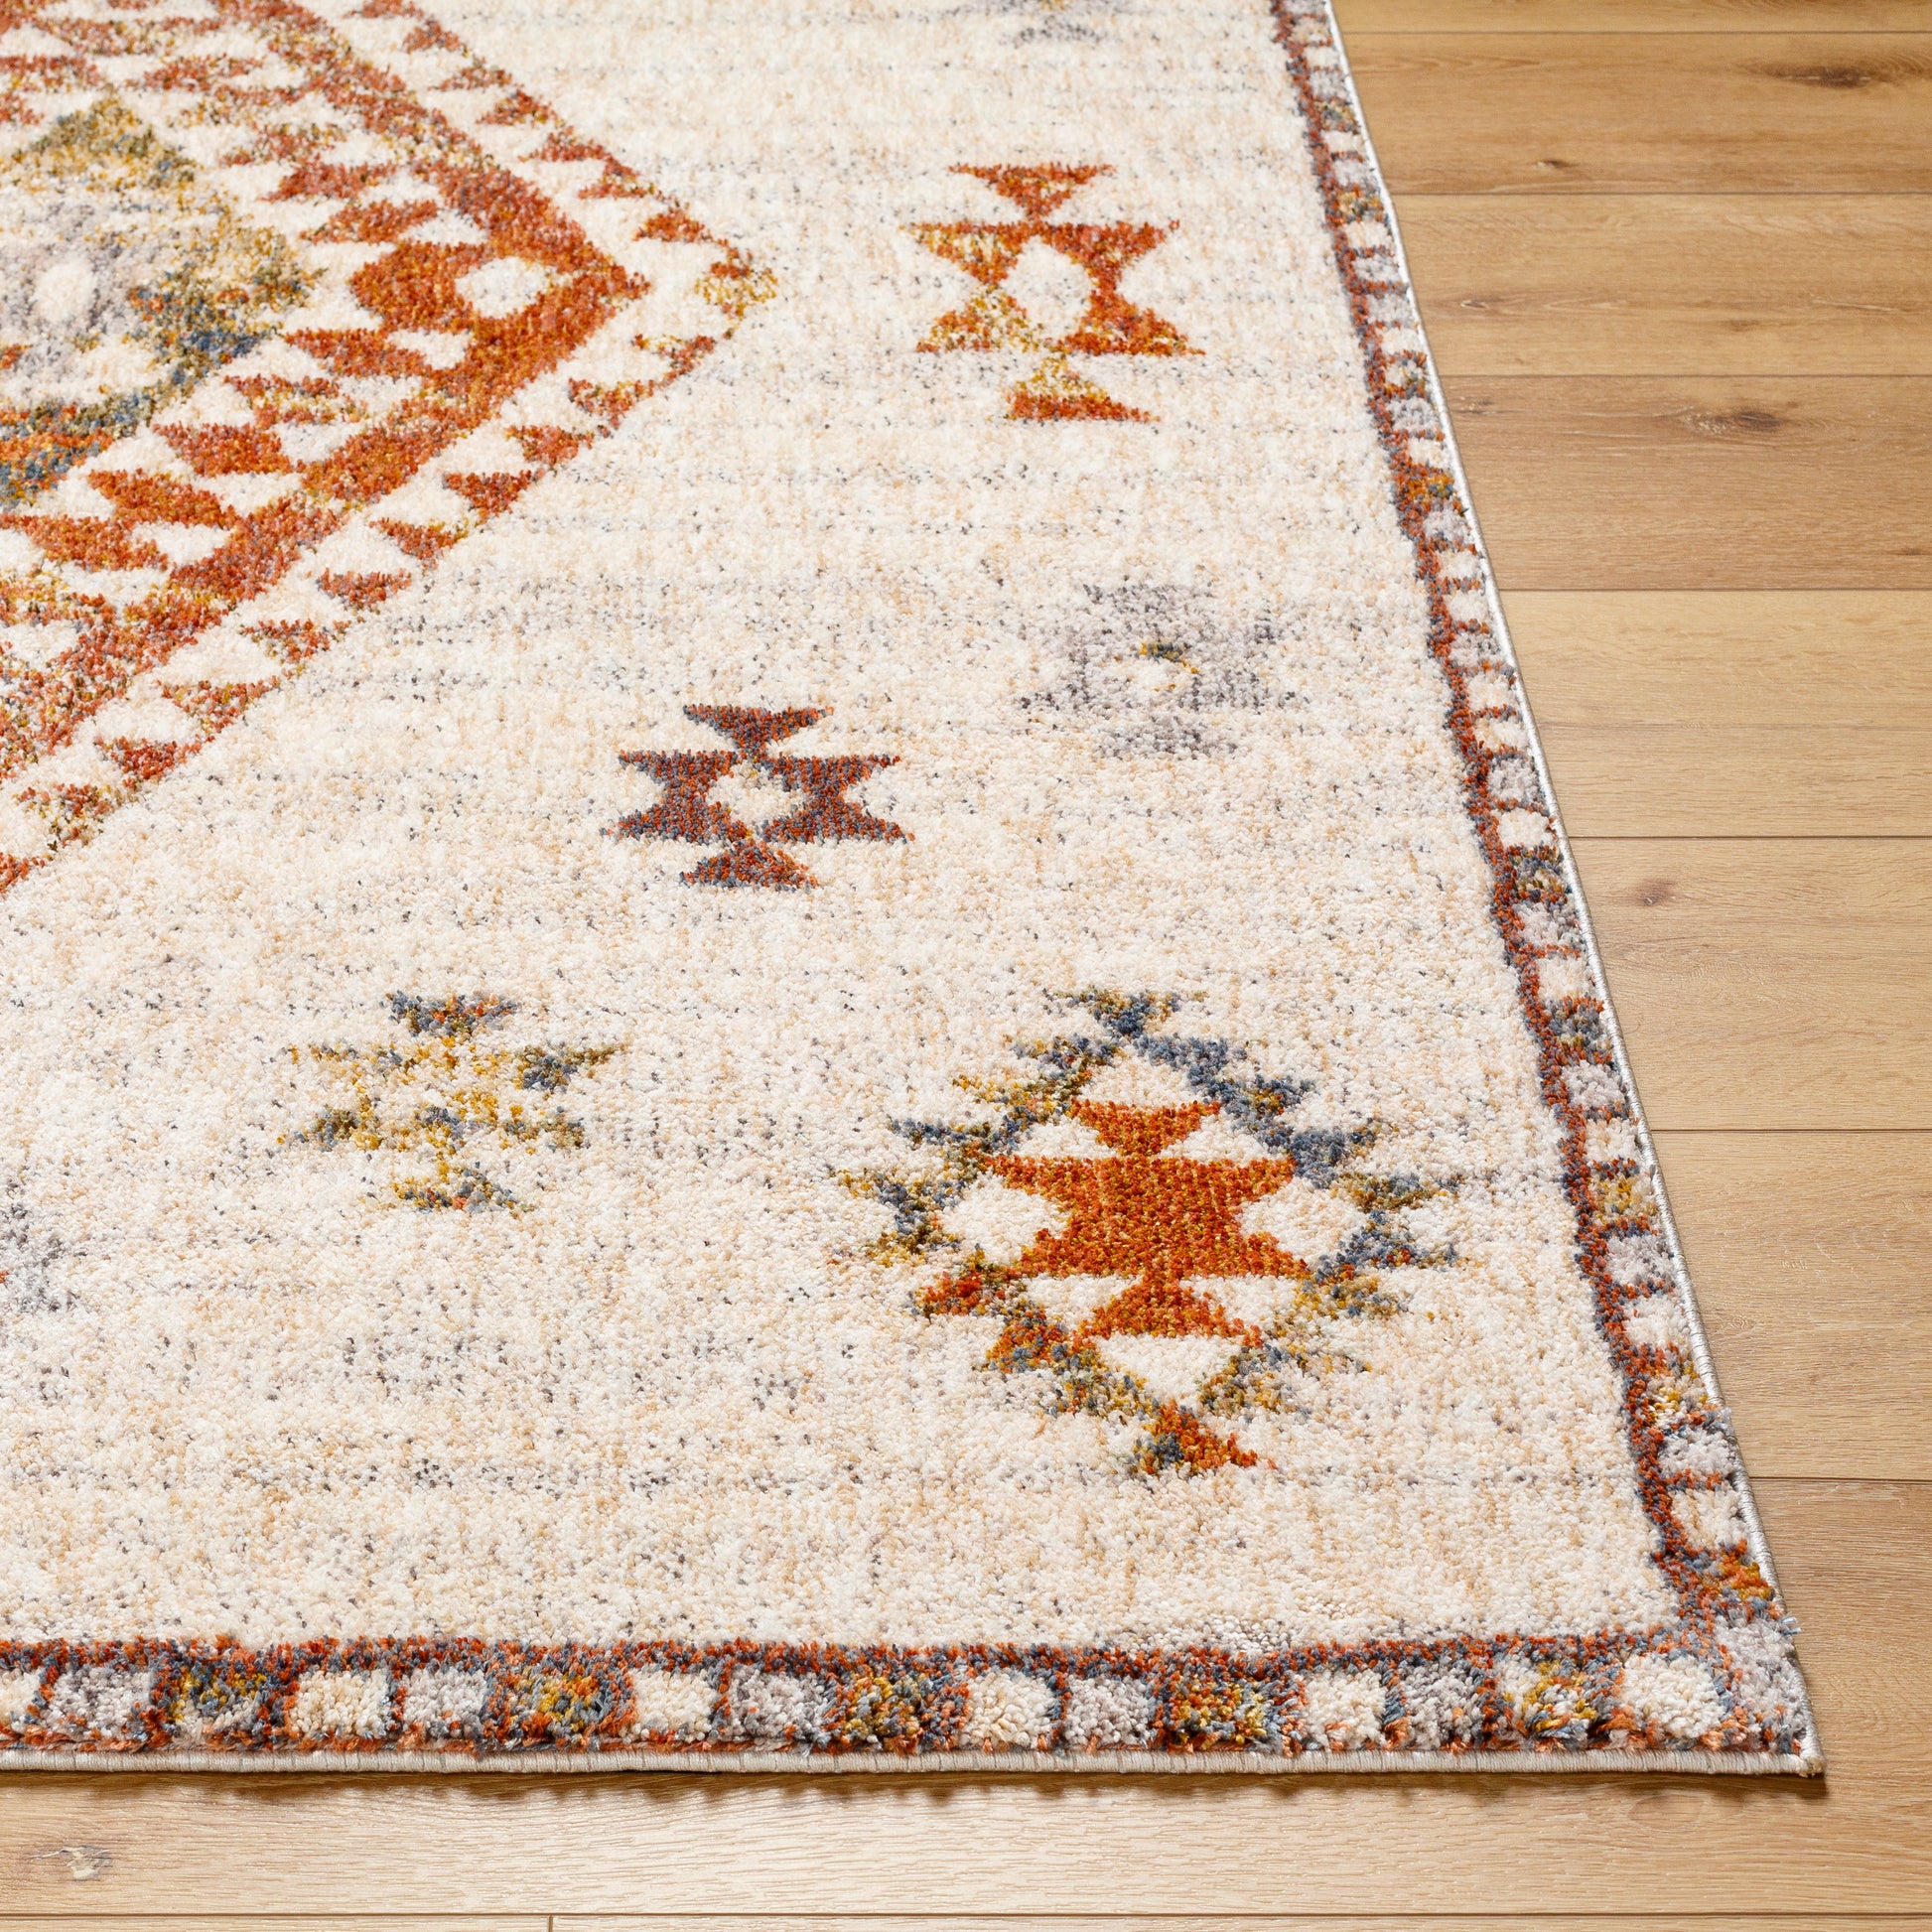 Surya Monet Mmo-2300 Pearl, Off-White, Ash, Camel, Natural, Clay Area Rug